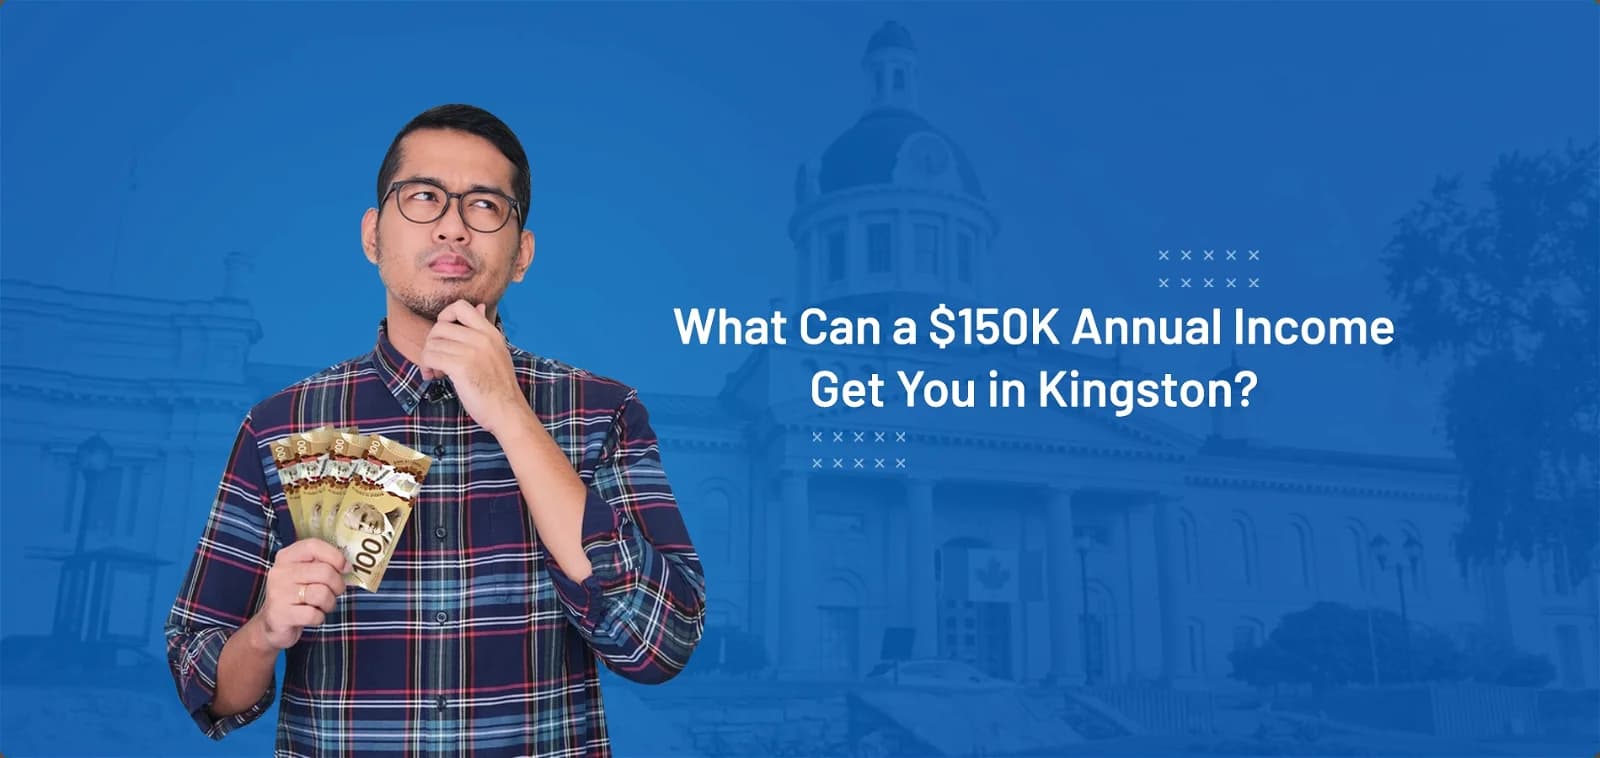 What You Can Afford With an Annual Household Income of $150K in Kingston?